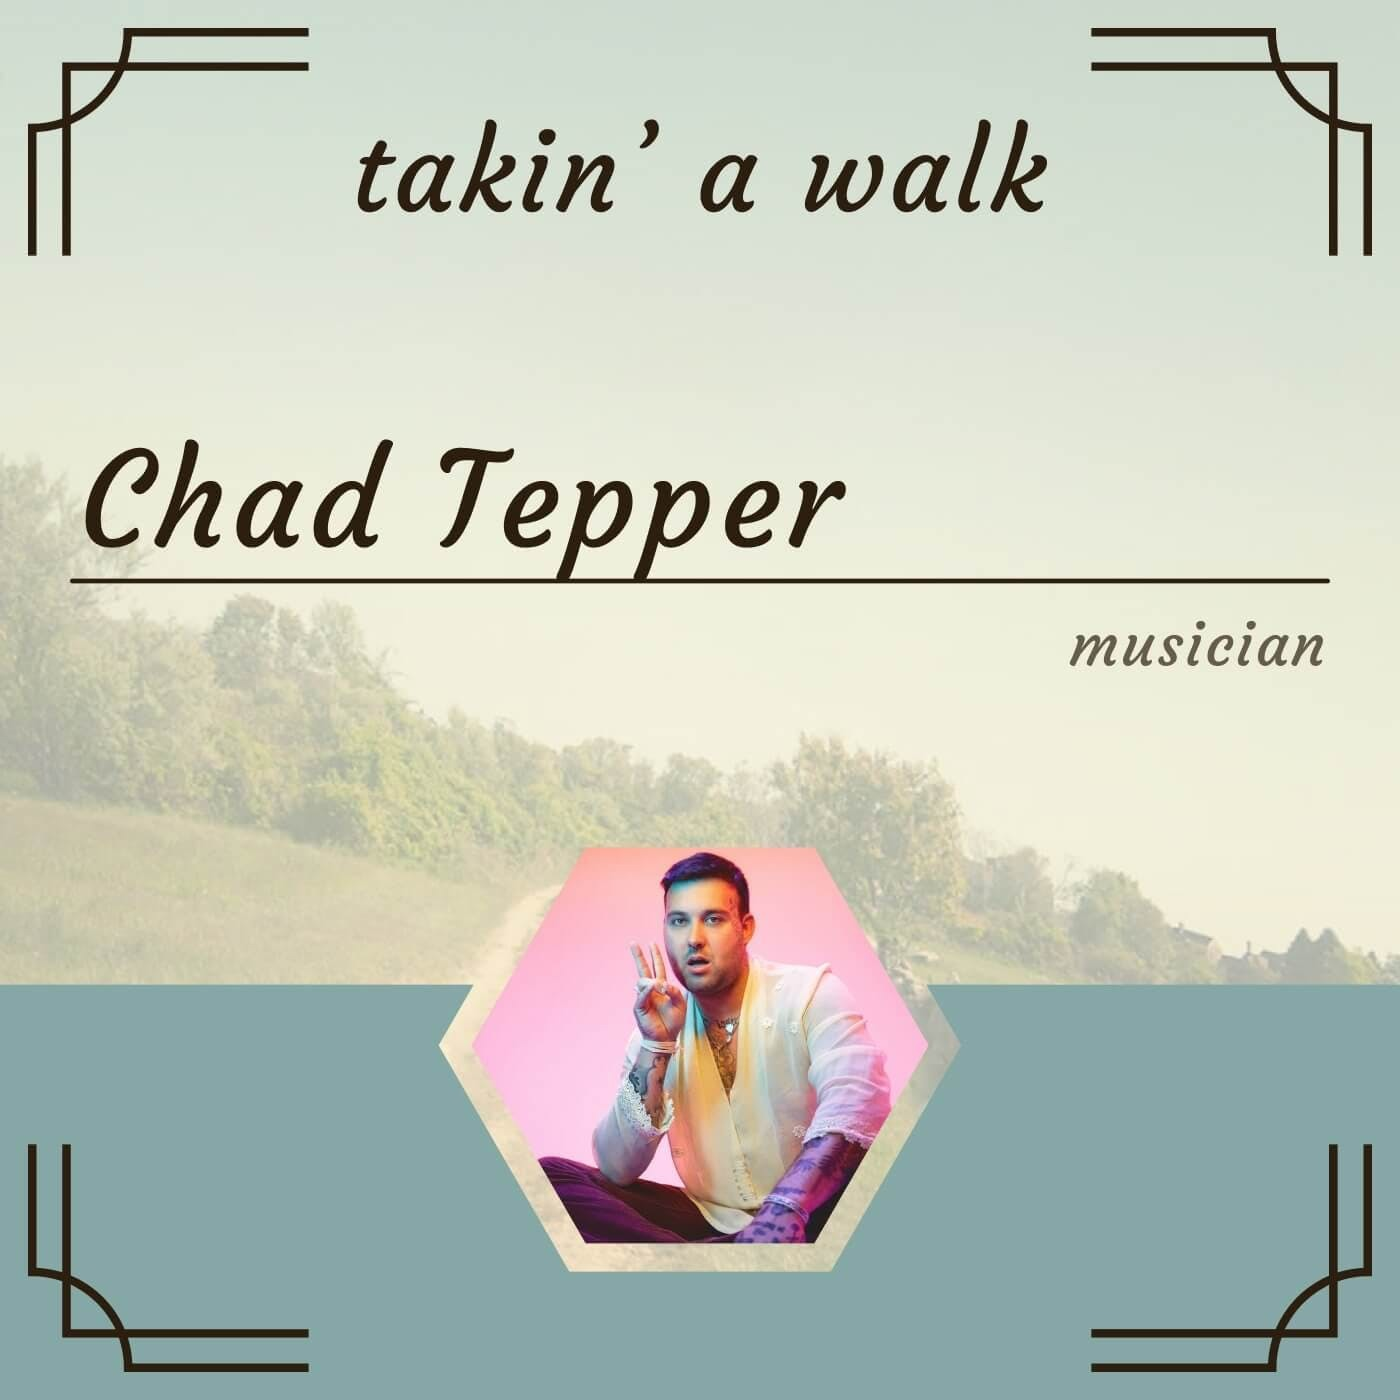 Musician Chad Tepper: The inspiring inside story behind his alternative rock success